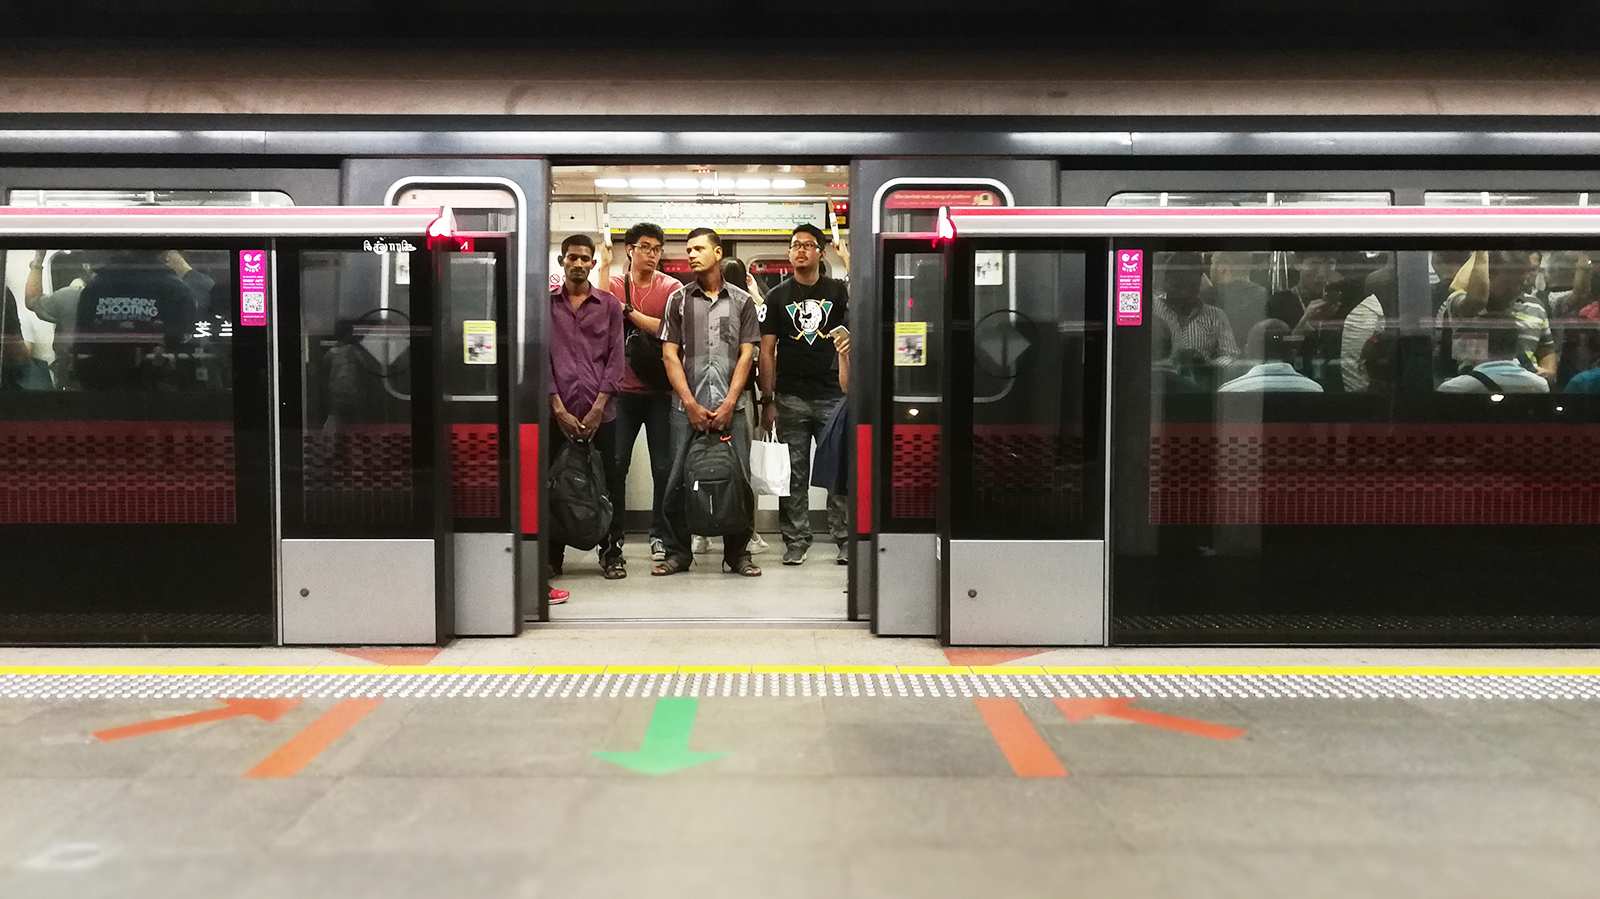 She was hurt and bleeding in the MRT – then a kind stranger defied the bystander effect to help